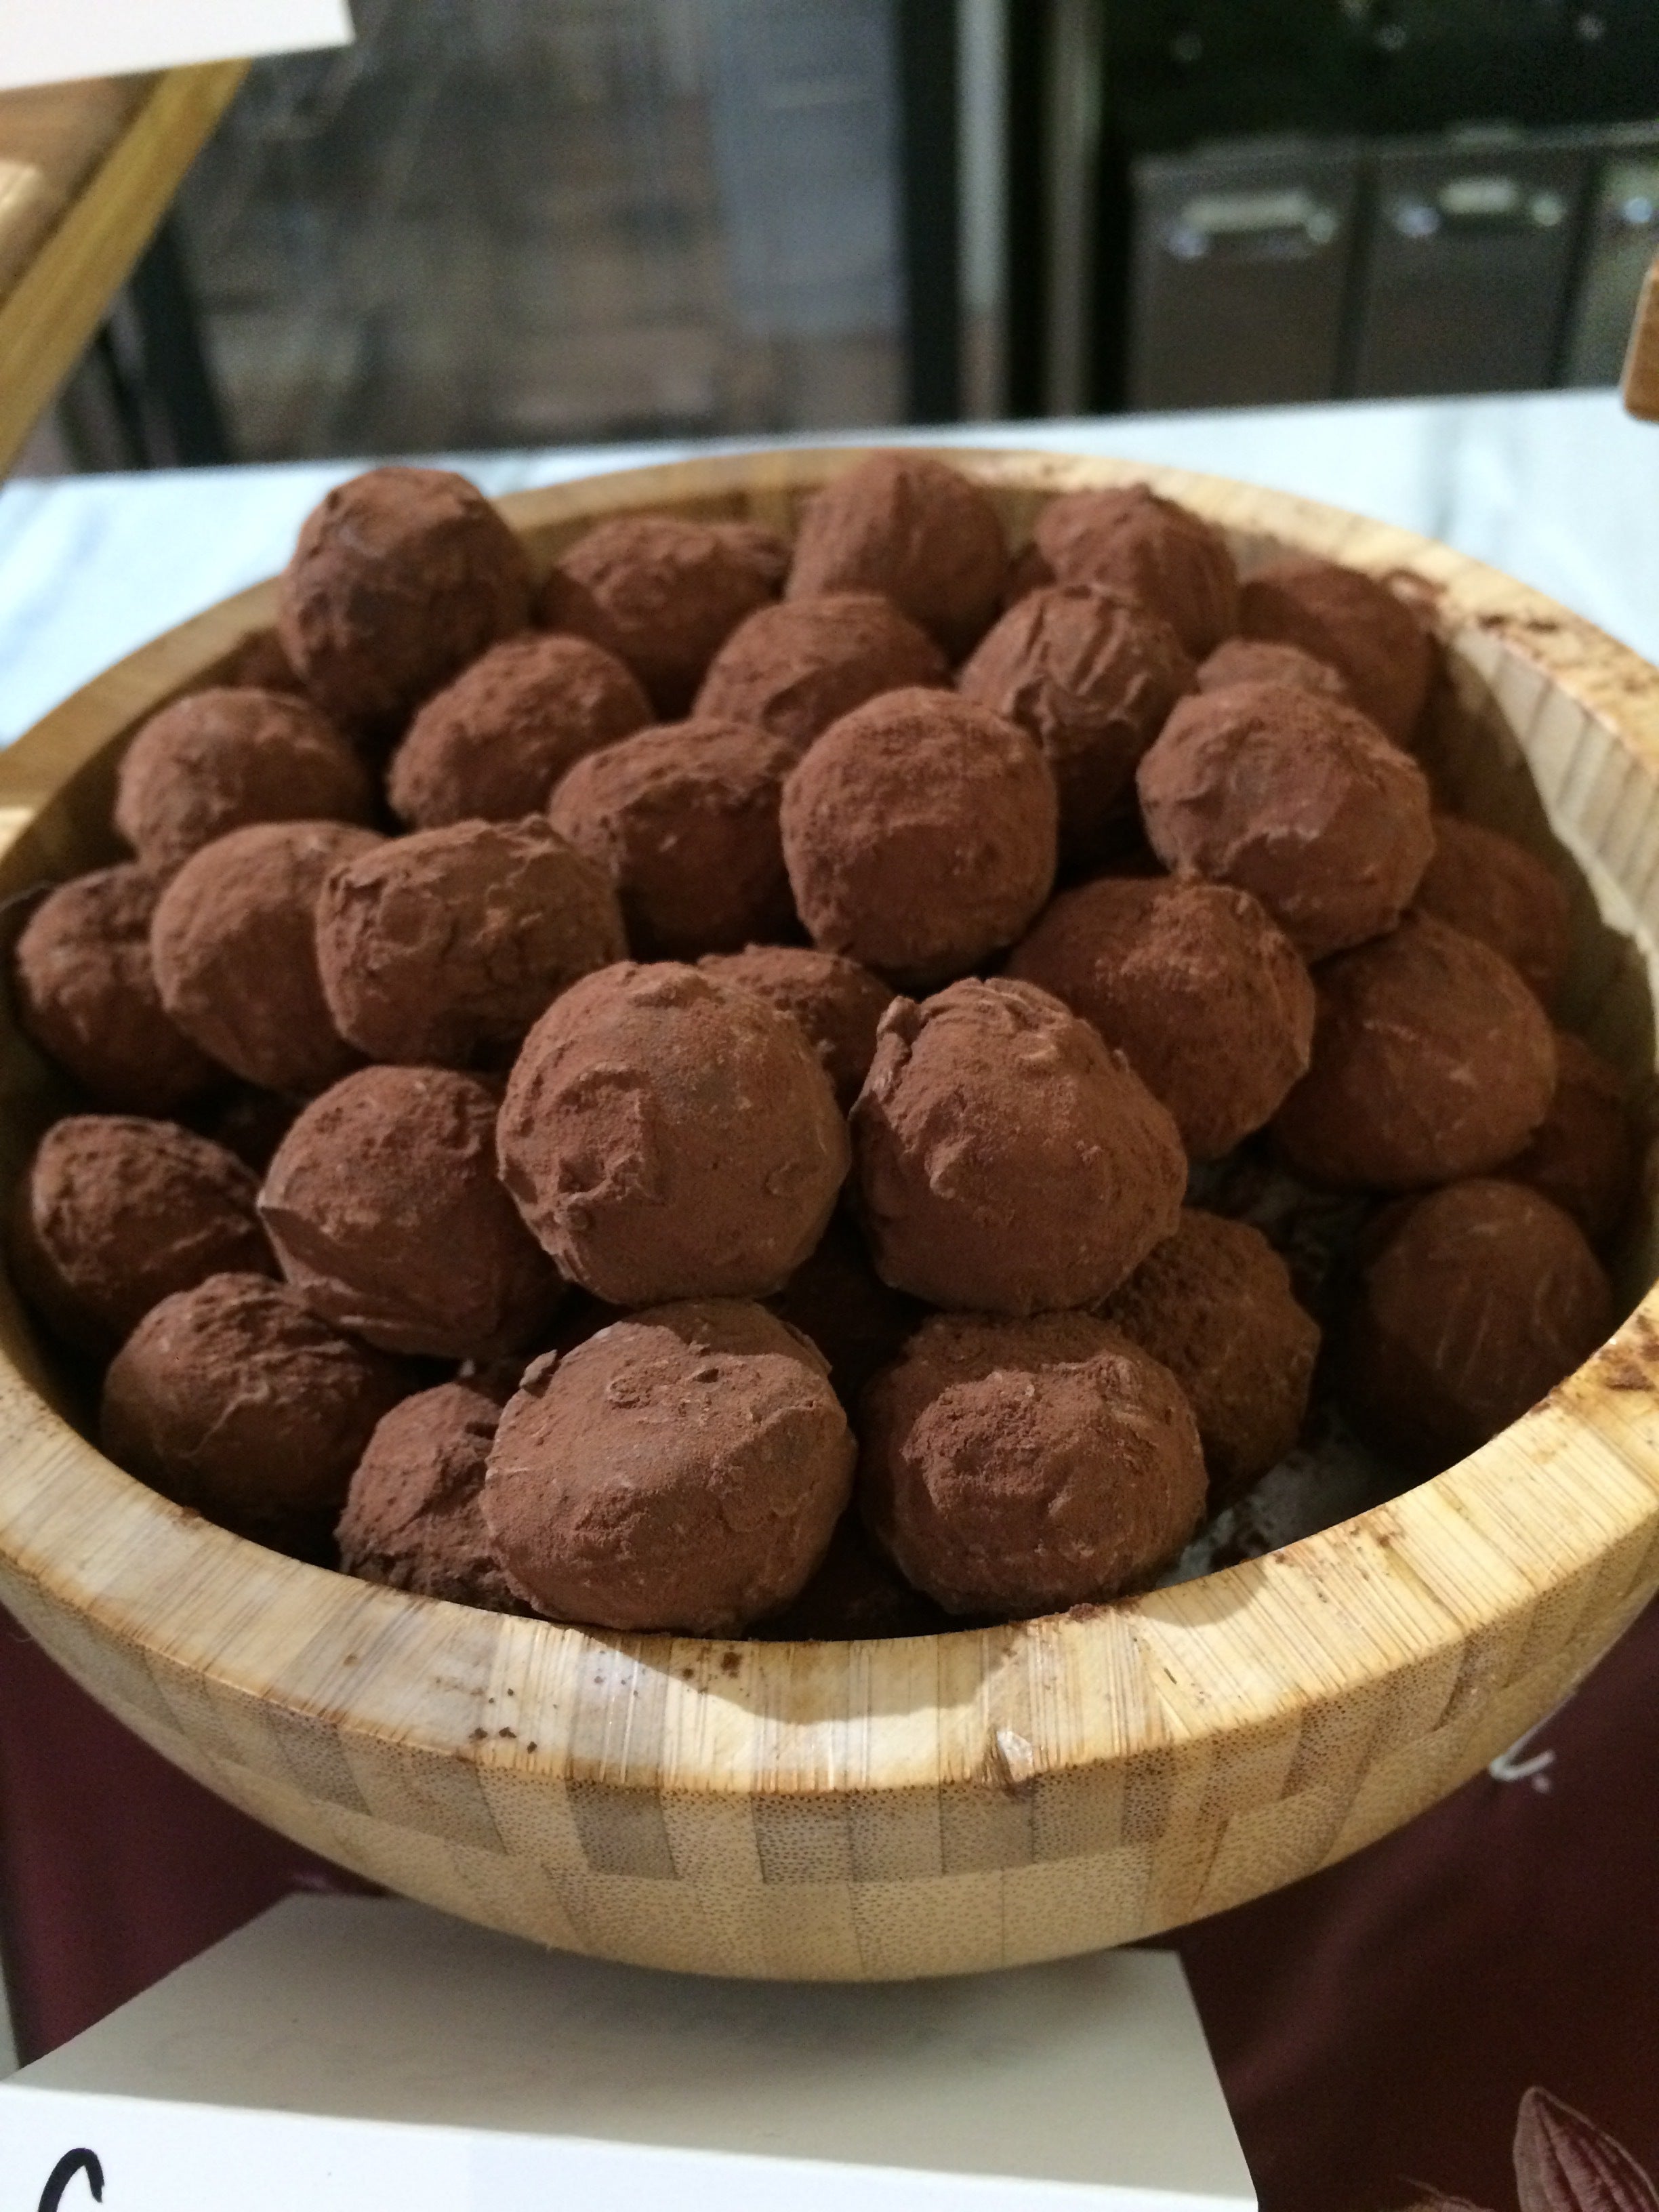 OCT 14th IN-PERSON - Chocolate Truffle-Making Blowout! with Ruth Kennison